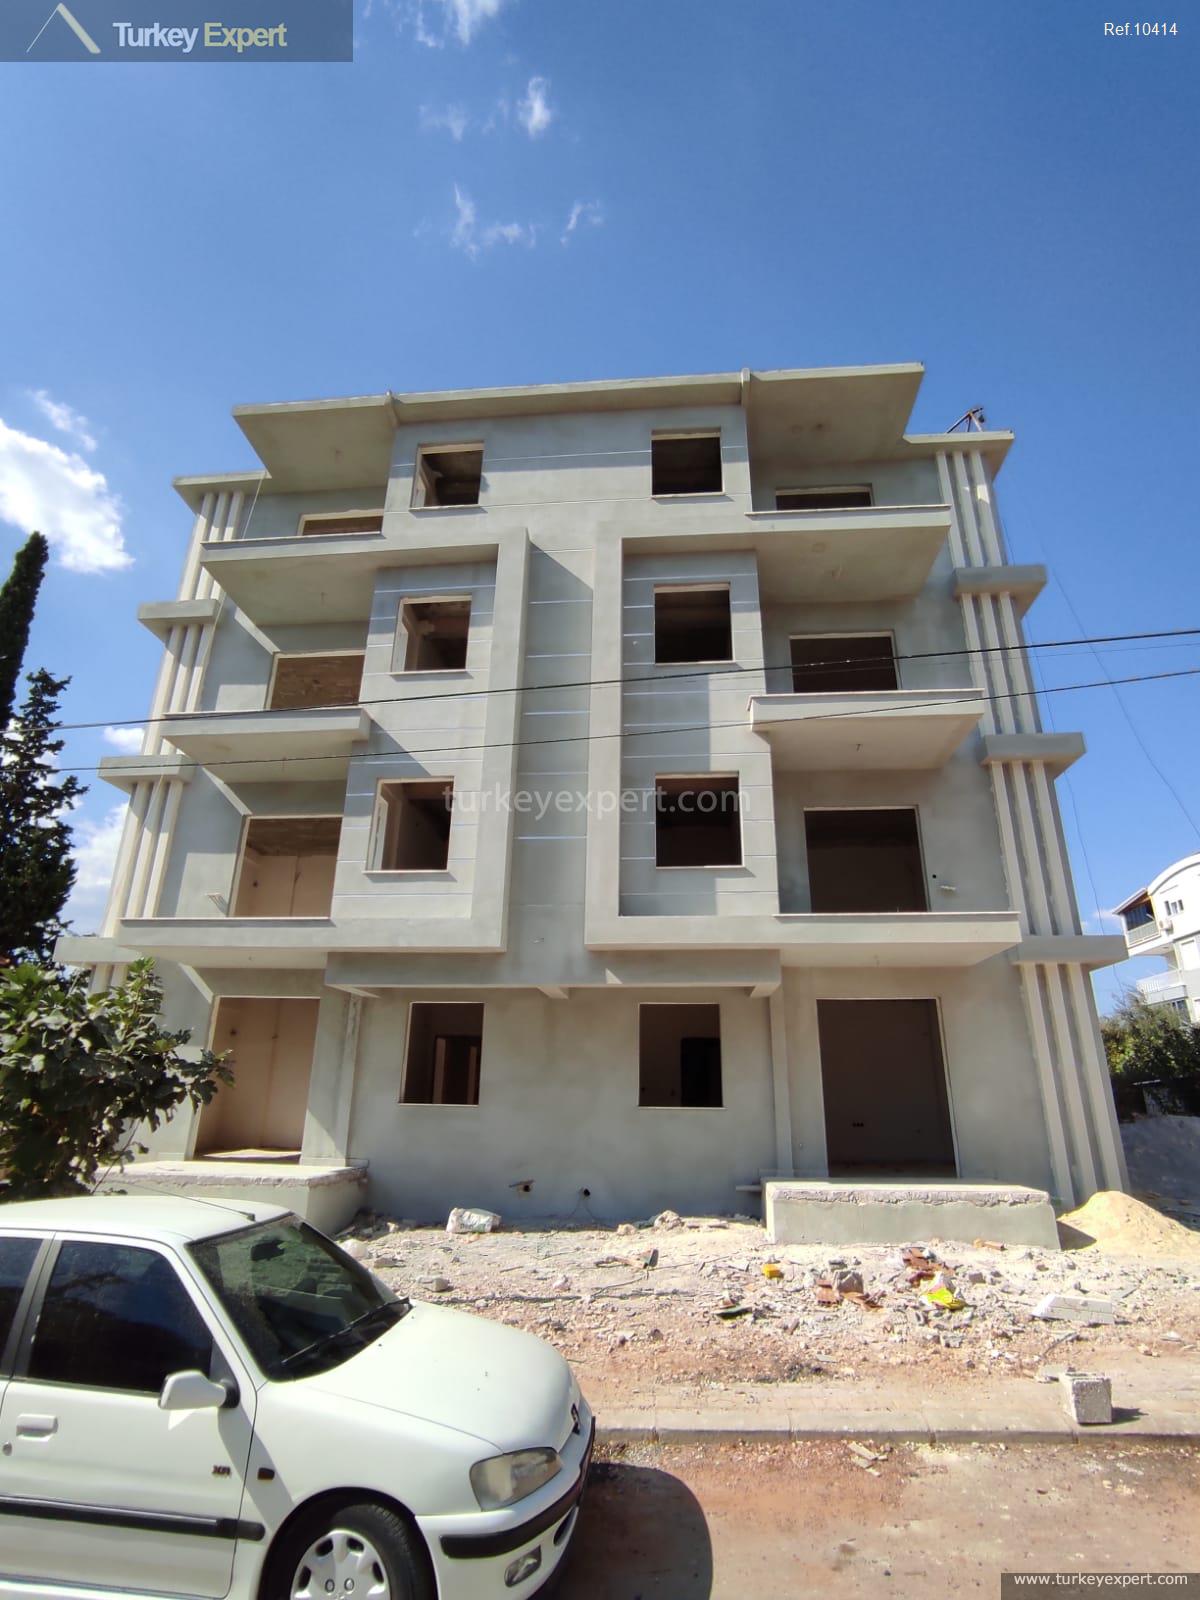 affordable 2bedroom apartments for sale in antalya5